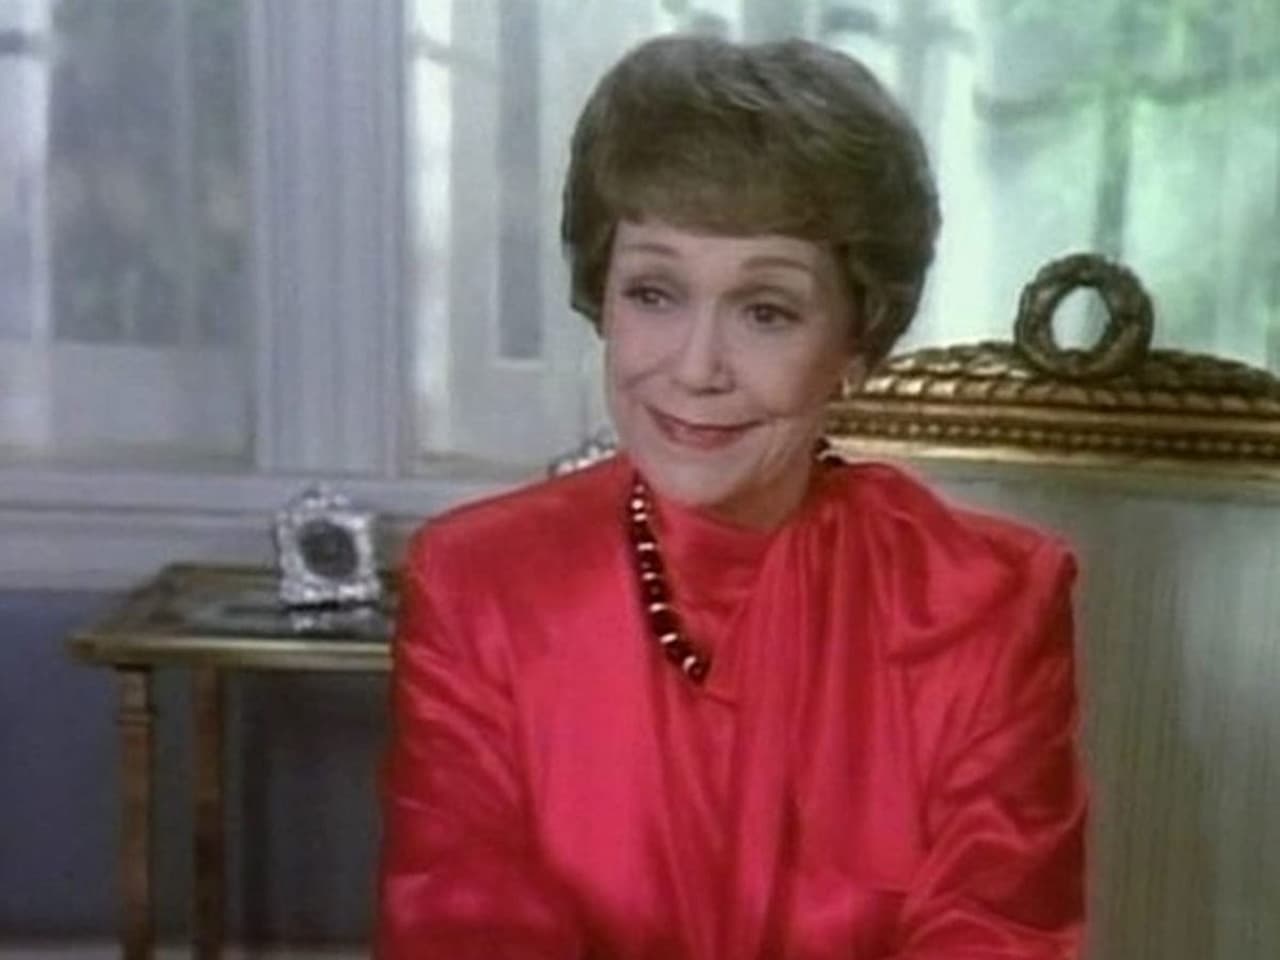 Falcon Crest - Season 5 Episode 19 : Finders and Losers